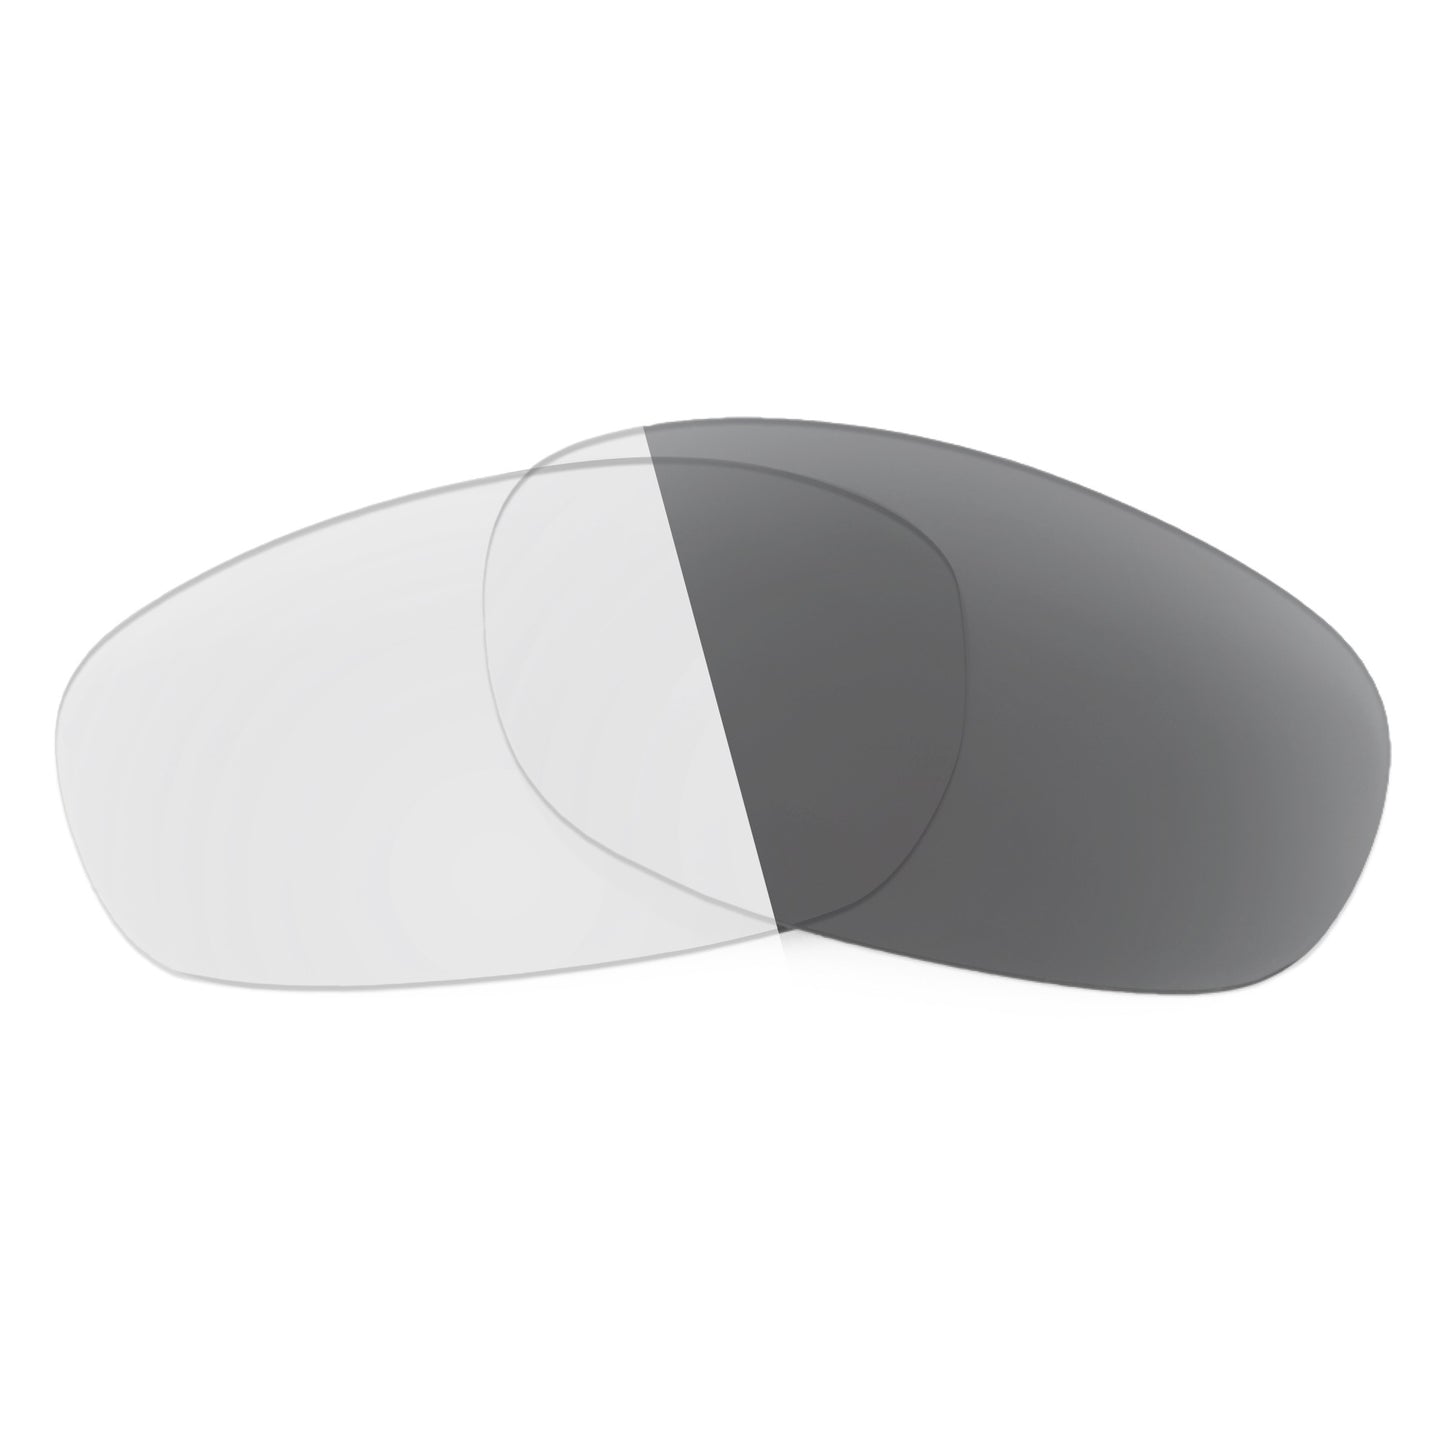 Revant replacement lenses for Ray-Ban RB3269 63mm Non-Polarized Adapt Gray Photochromic